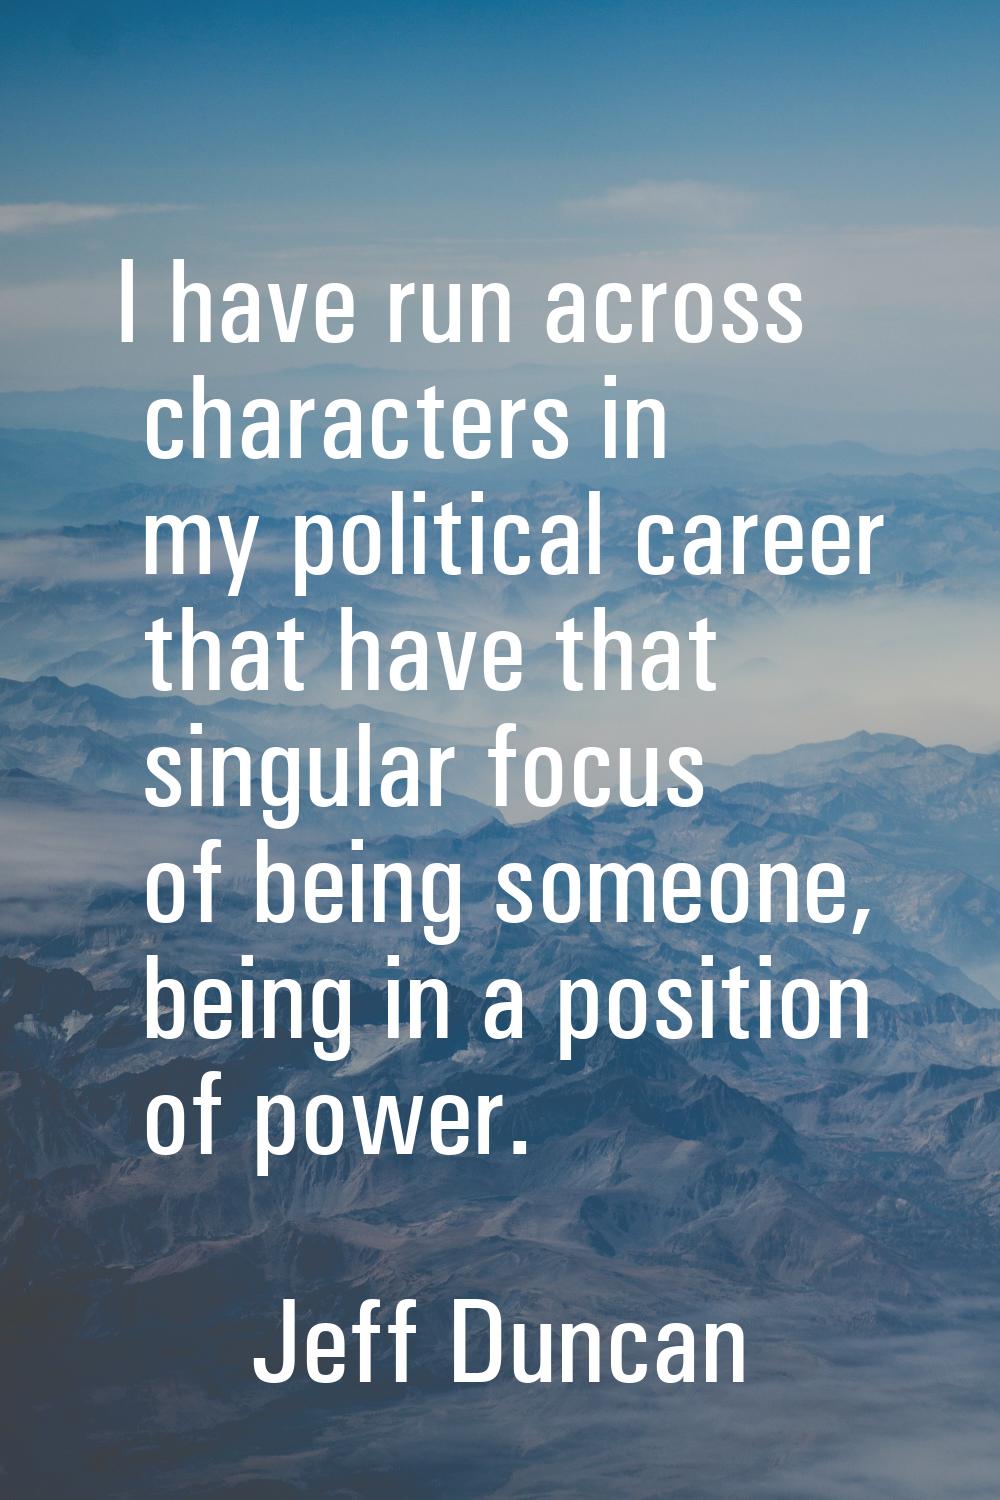 I have run across characters in my political career that have that singular focus of being someone,